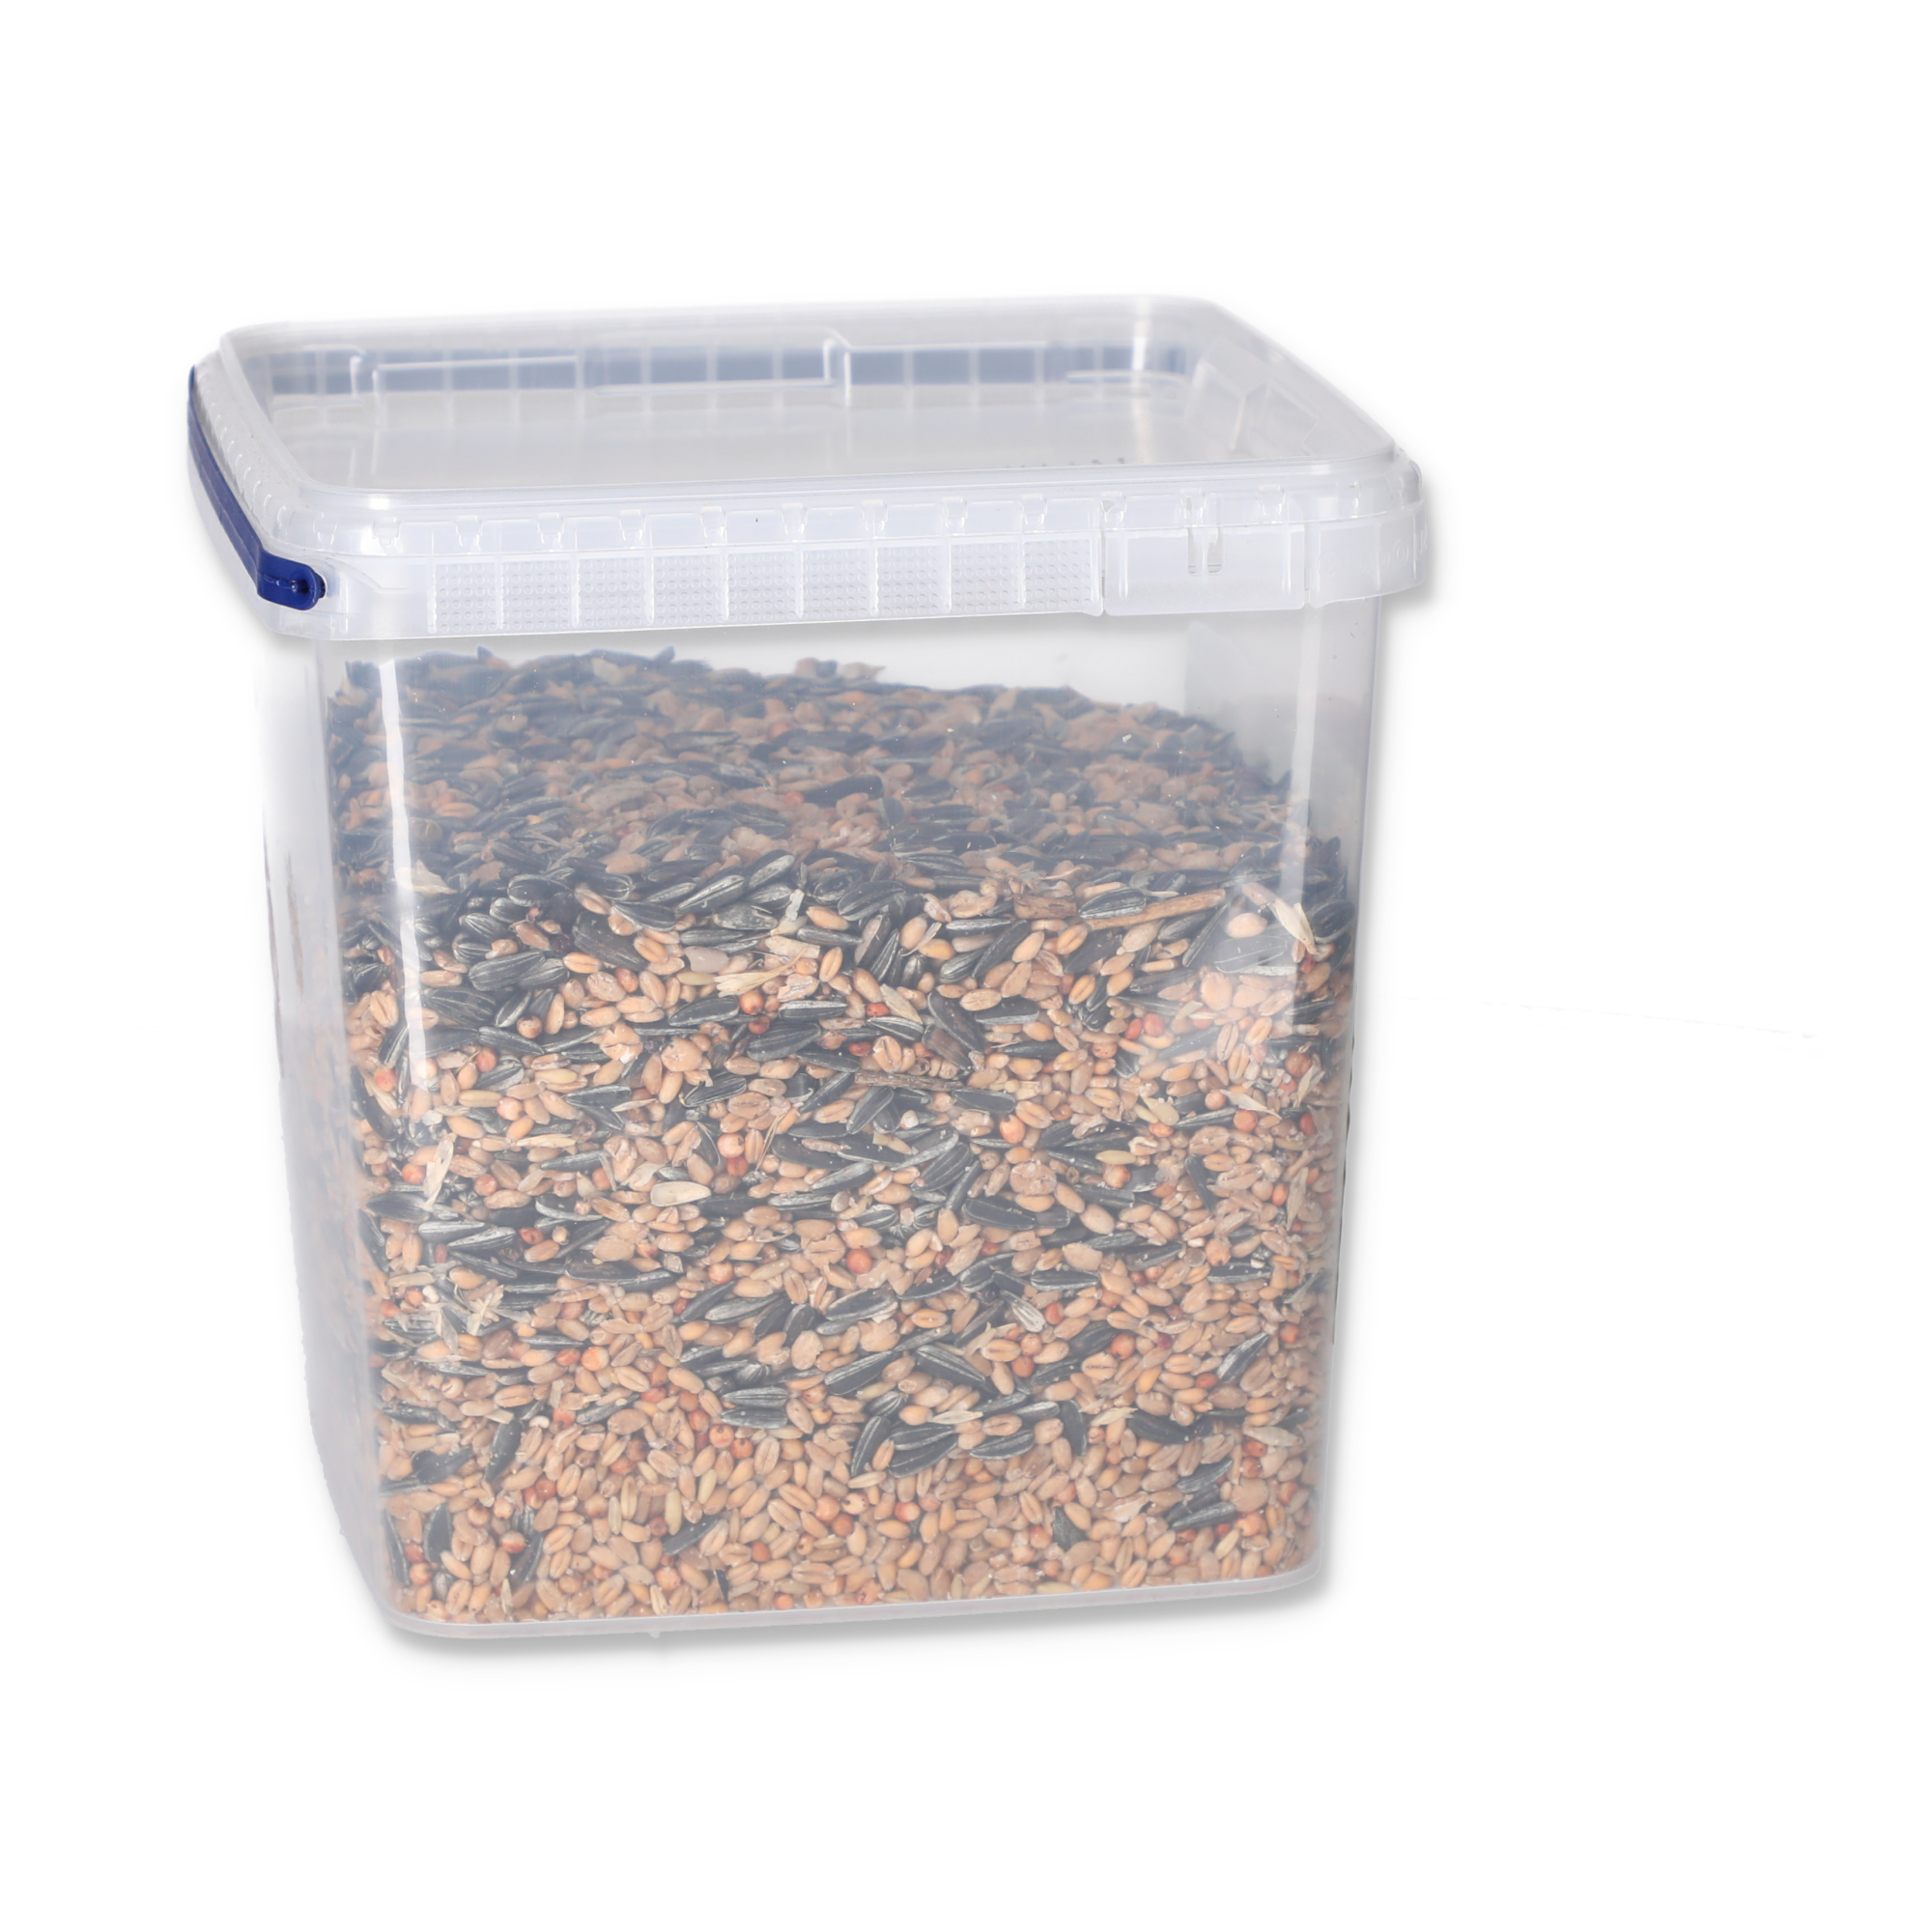 Wildvogelfutter Eimer 2,7 kg + product picture